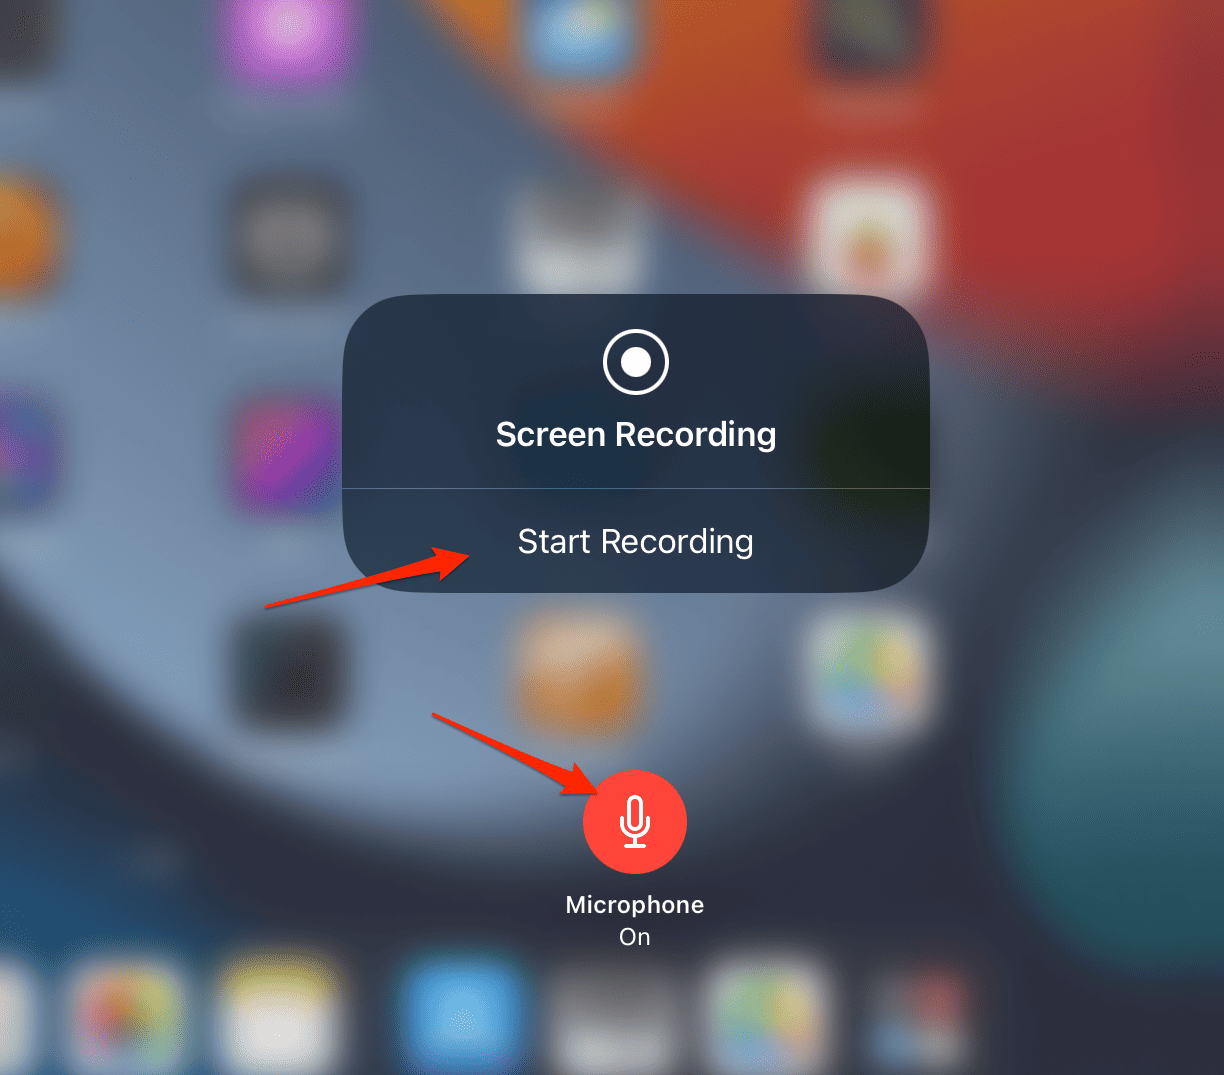 microphone_start_recording how to screen record on ipad with sound